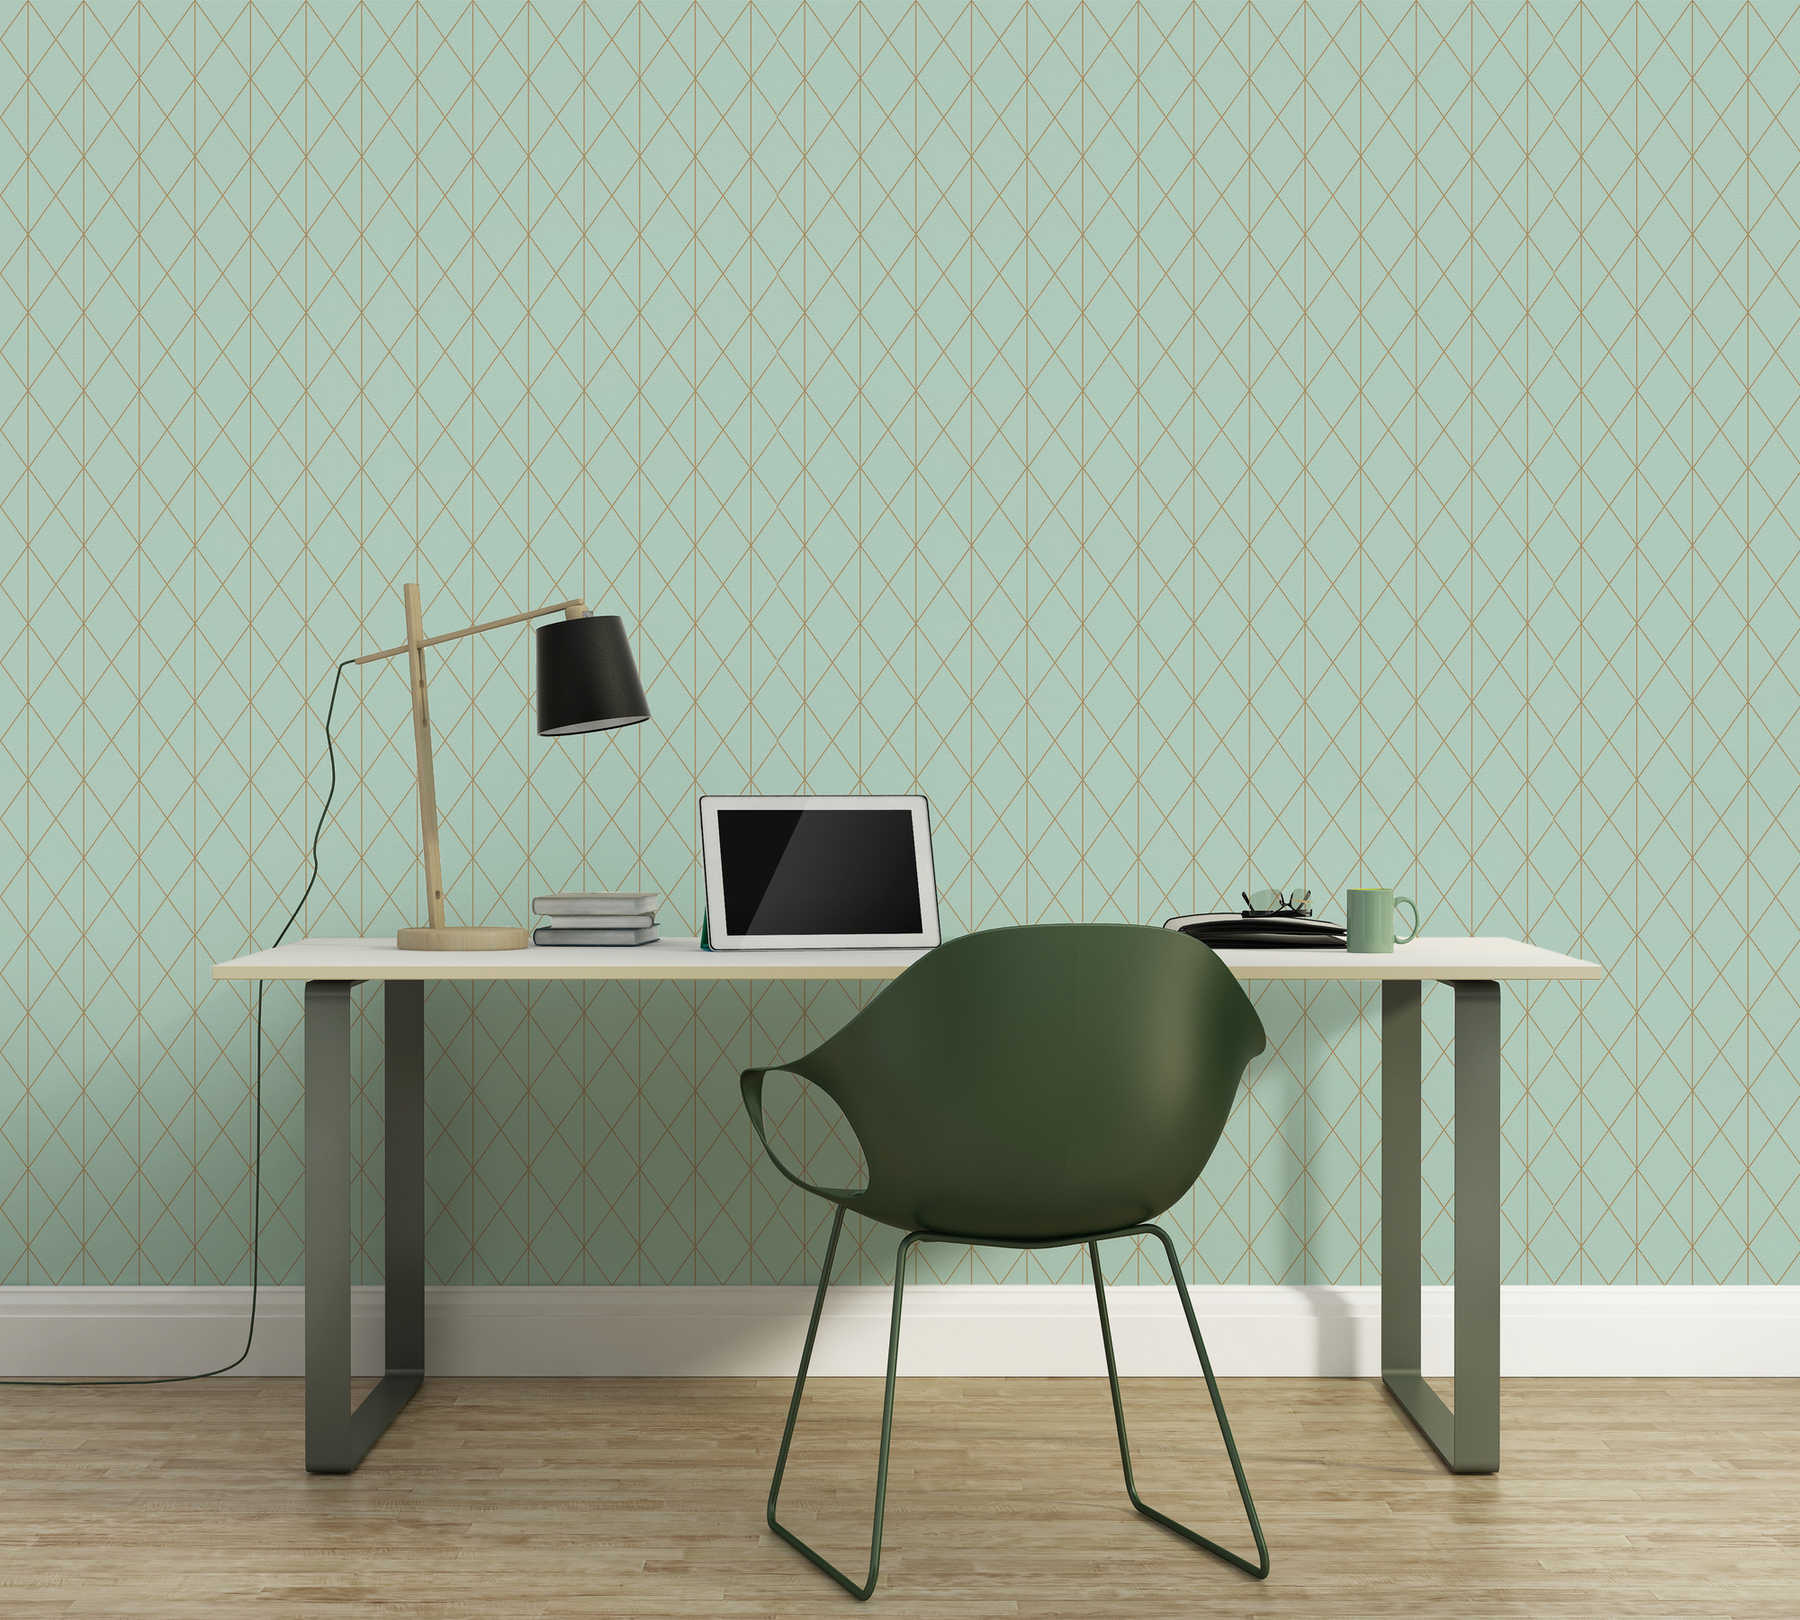             Wallpaper lozenge pattern with gold accent - green, metallic
        